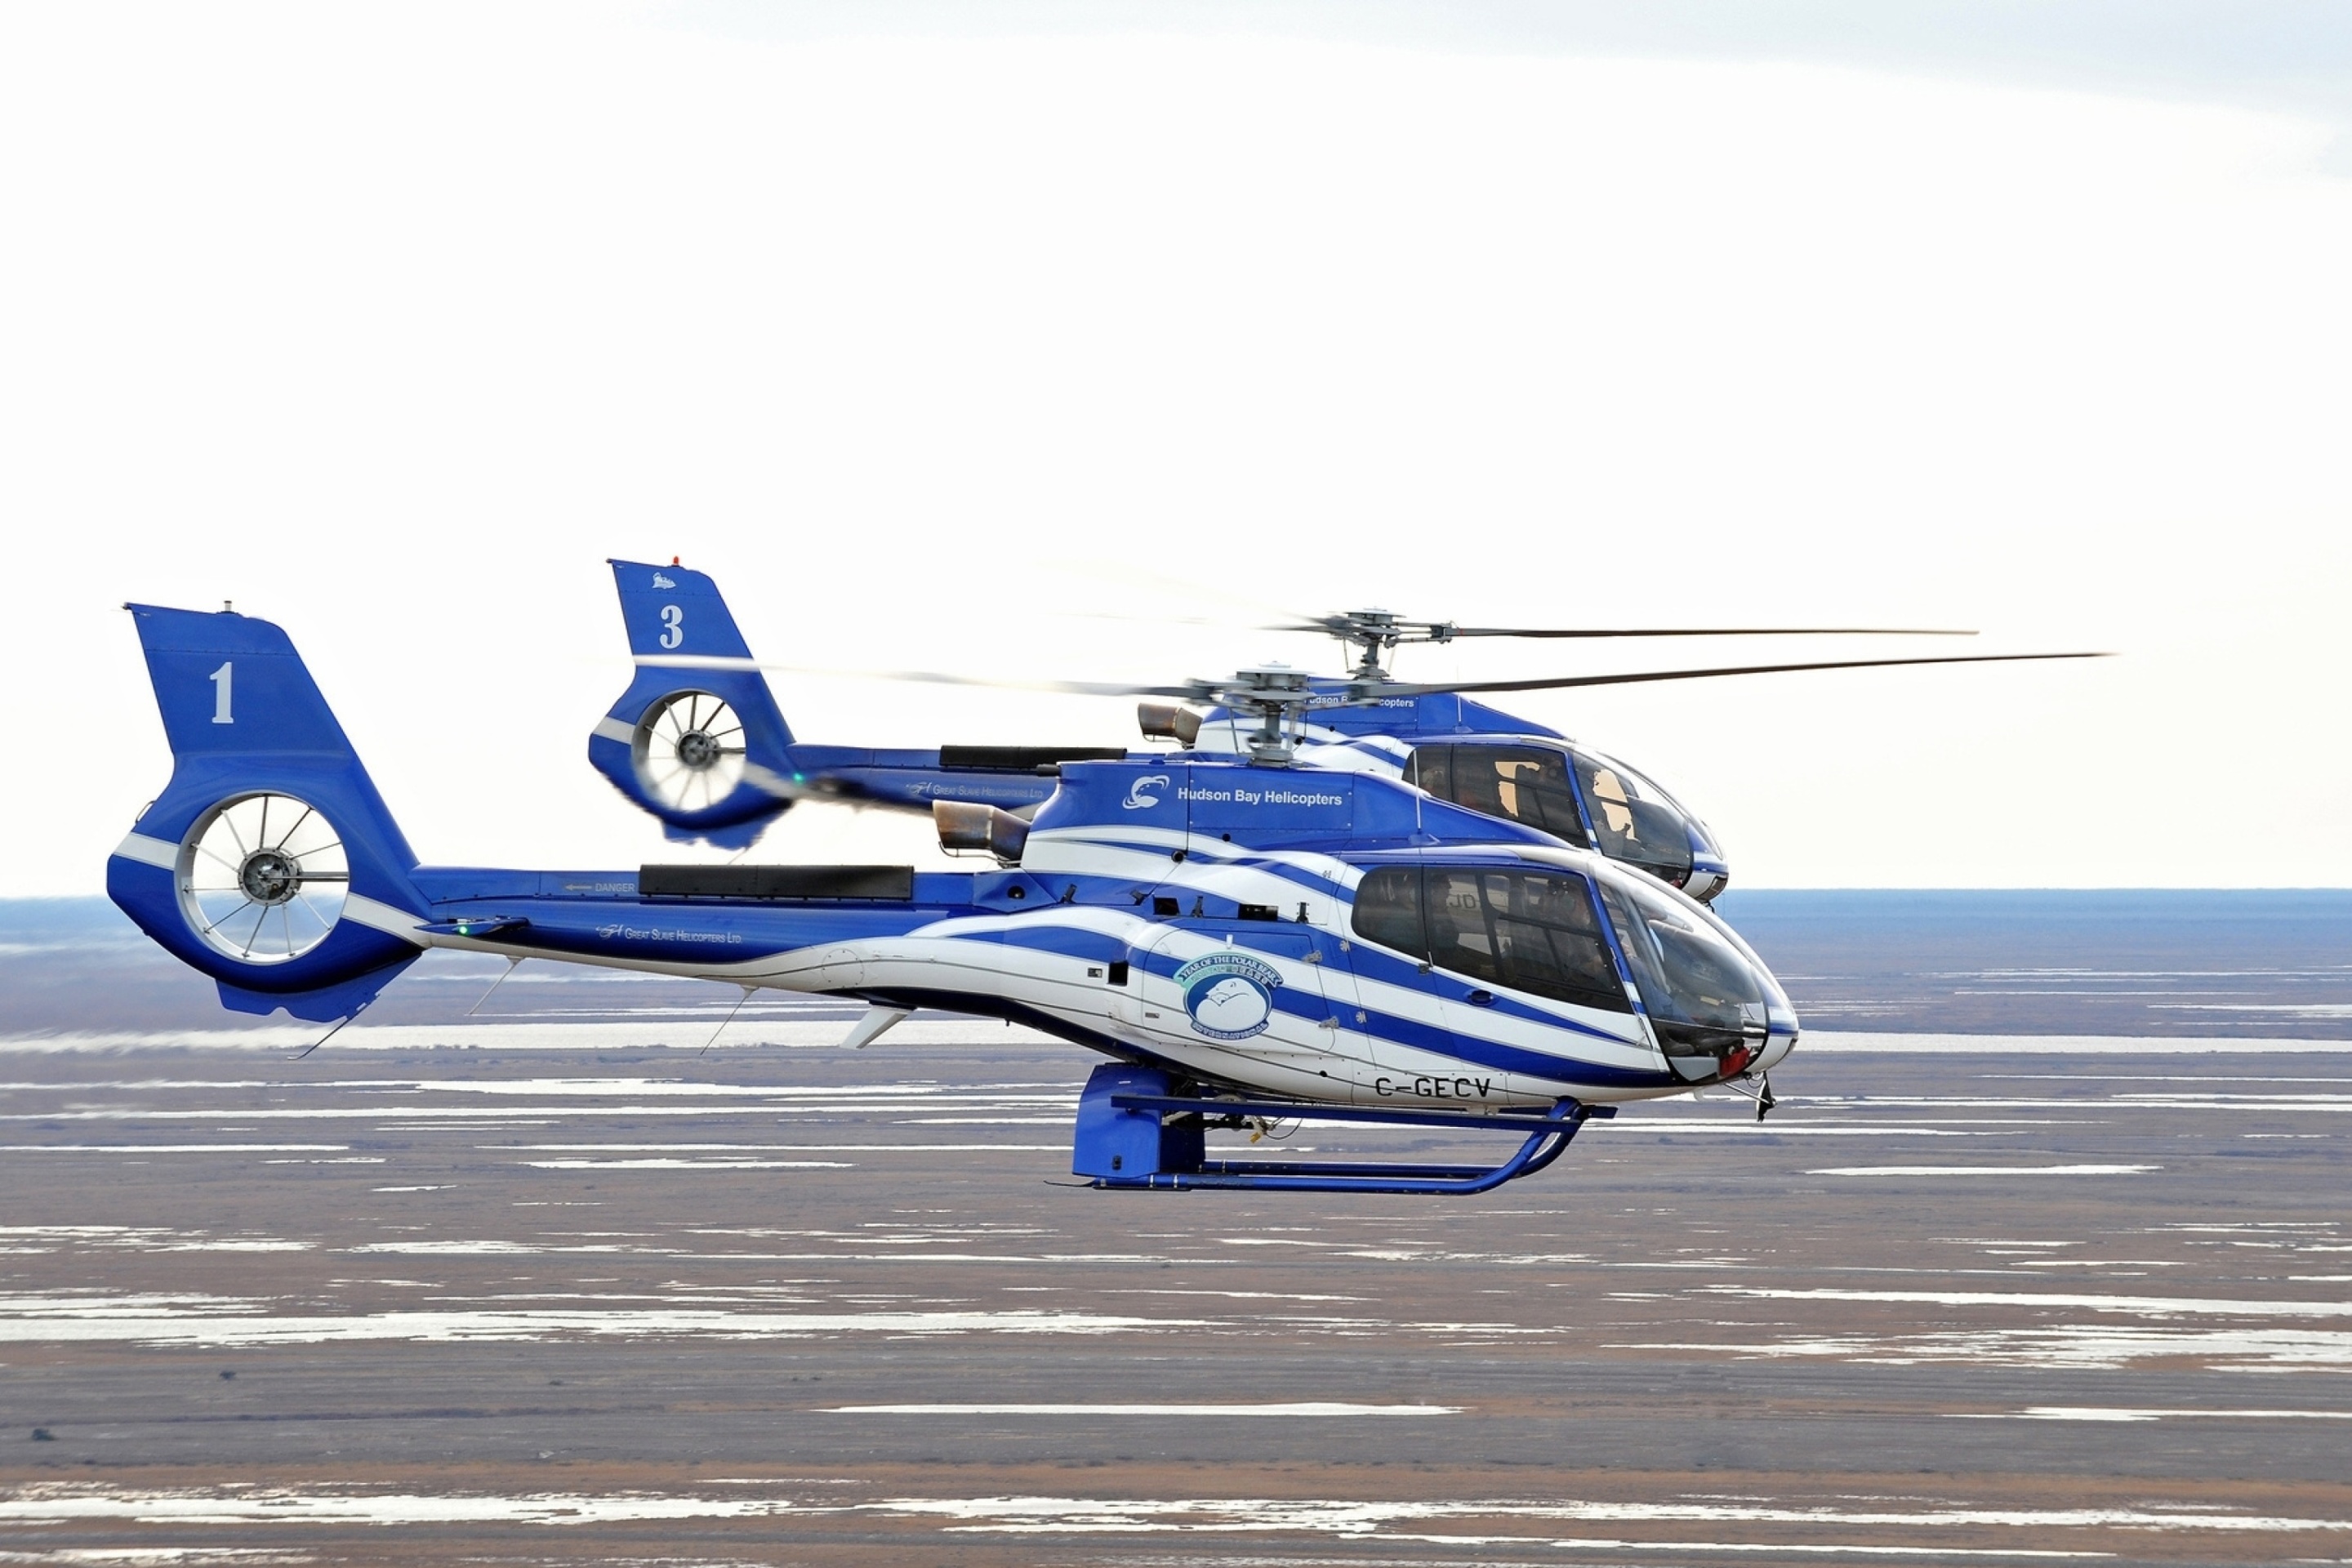 Hudson Bay Helicopters wallpaper 2880x1920